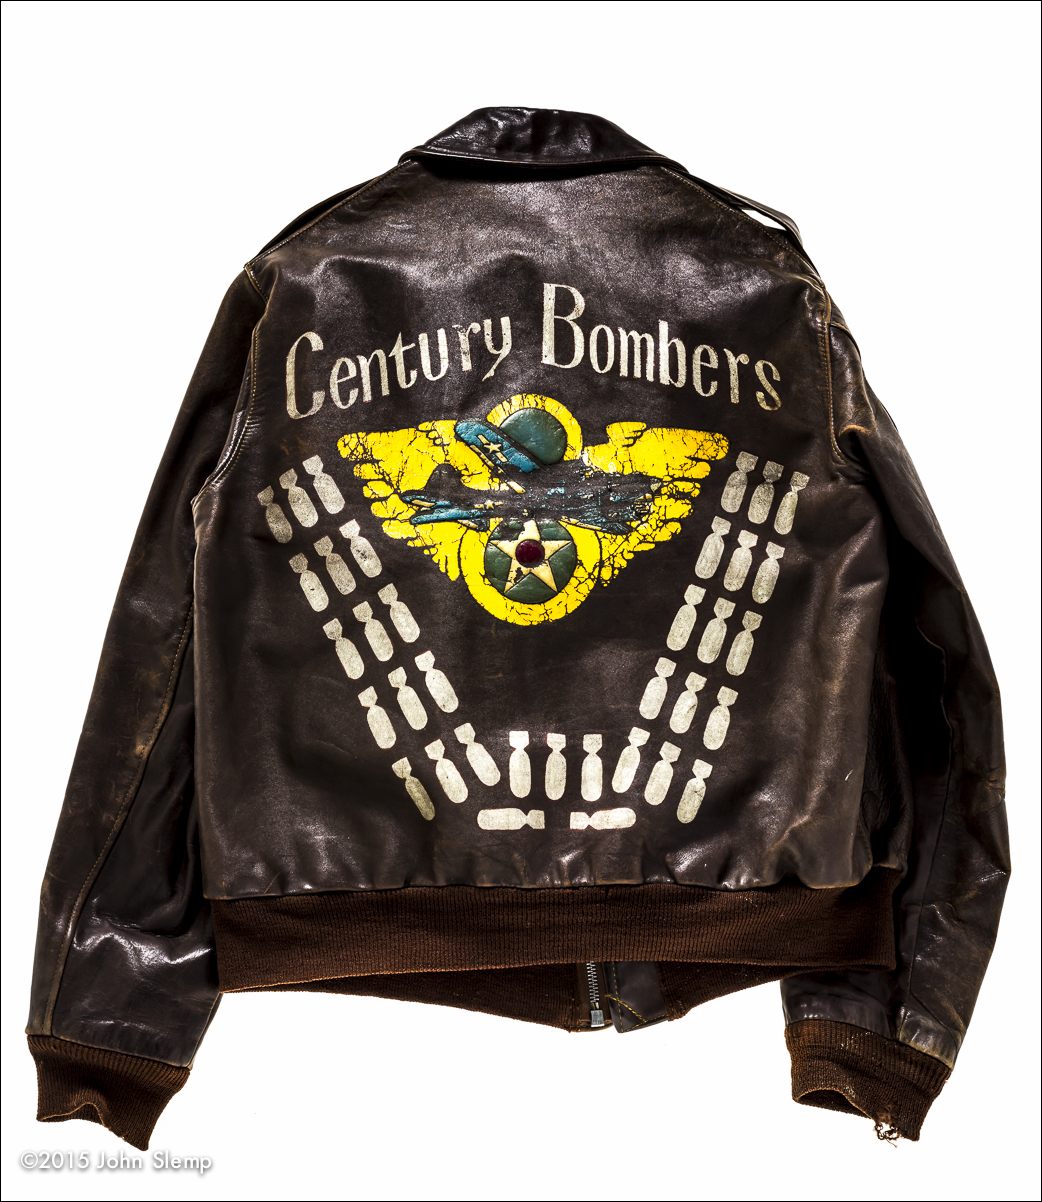 Captain Frederick G. Smith was a B-17 co-pilot who completed 35 missions from 11 August, 1944 to 21 January, 1945 thereby completing his combat tour.  He passed away on 23 June, 2011.  His jacket was loaned courtesy of his son, Rick.